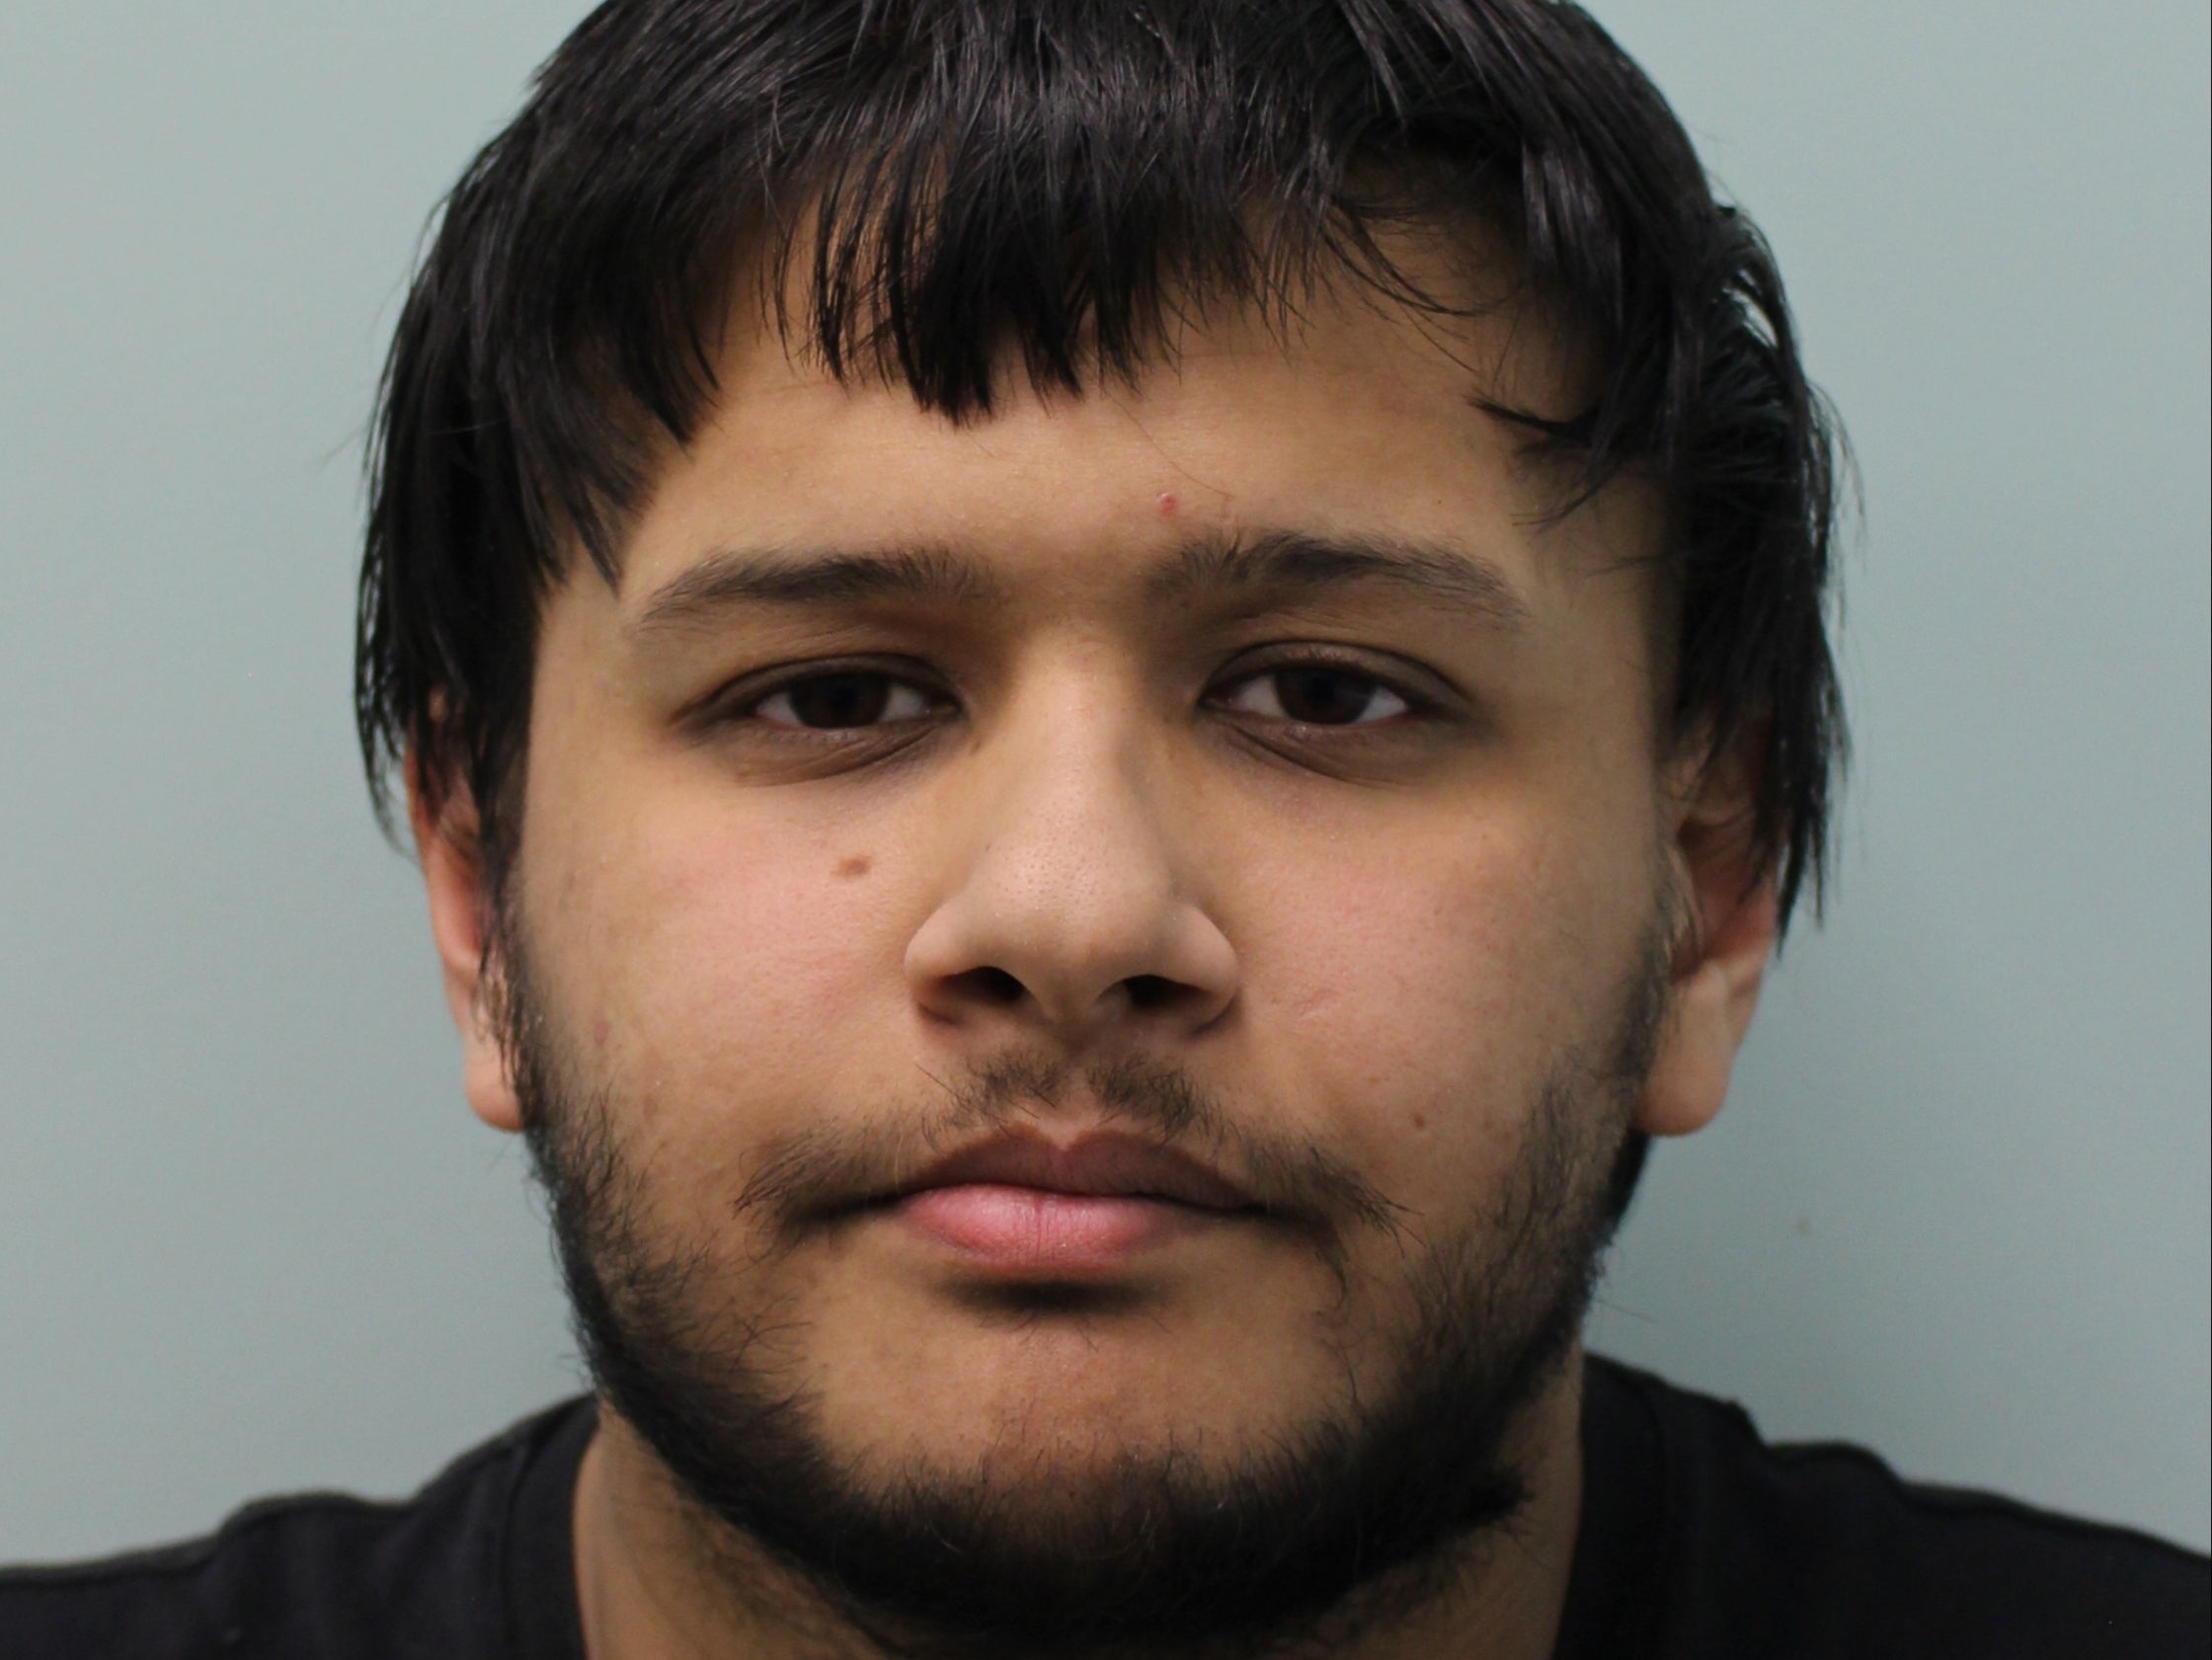 Mohammed Chowdhury tried to buy a grenade from an undercover police officer who was posing as an arms dealer